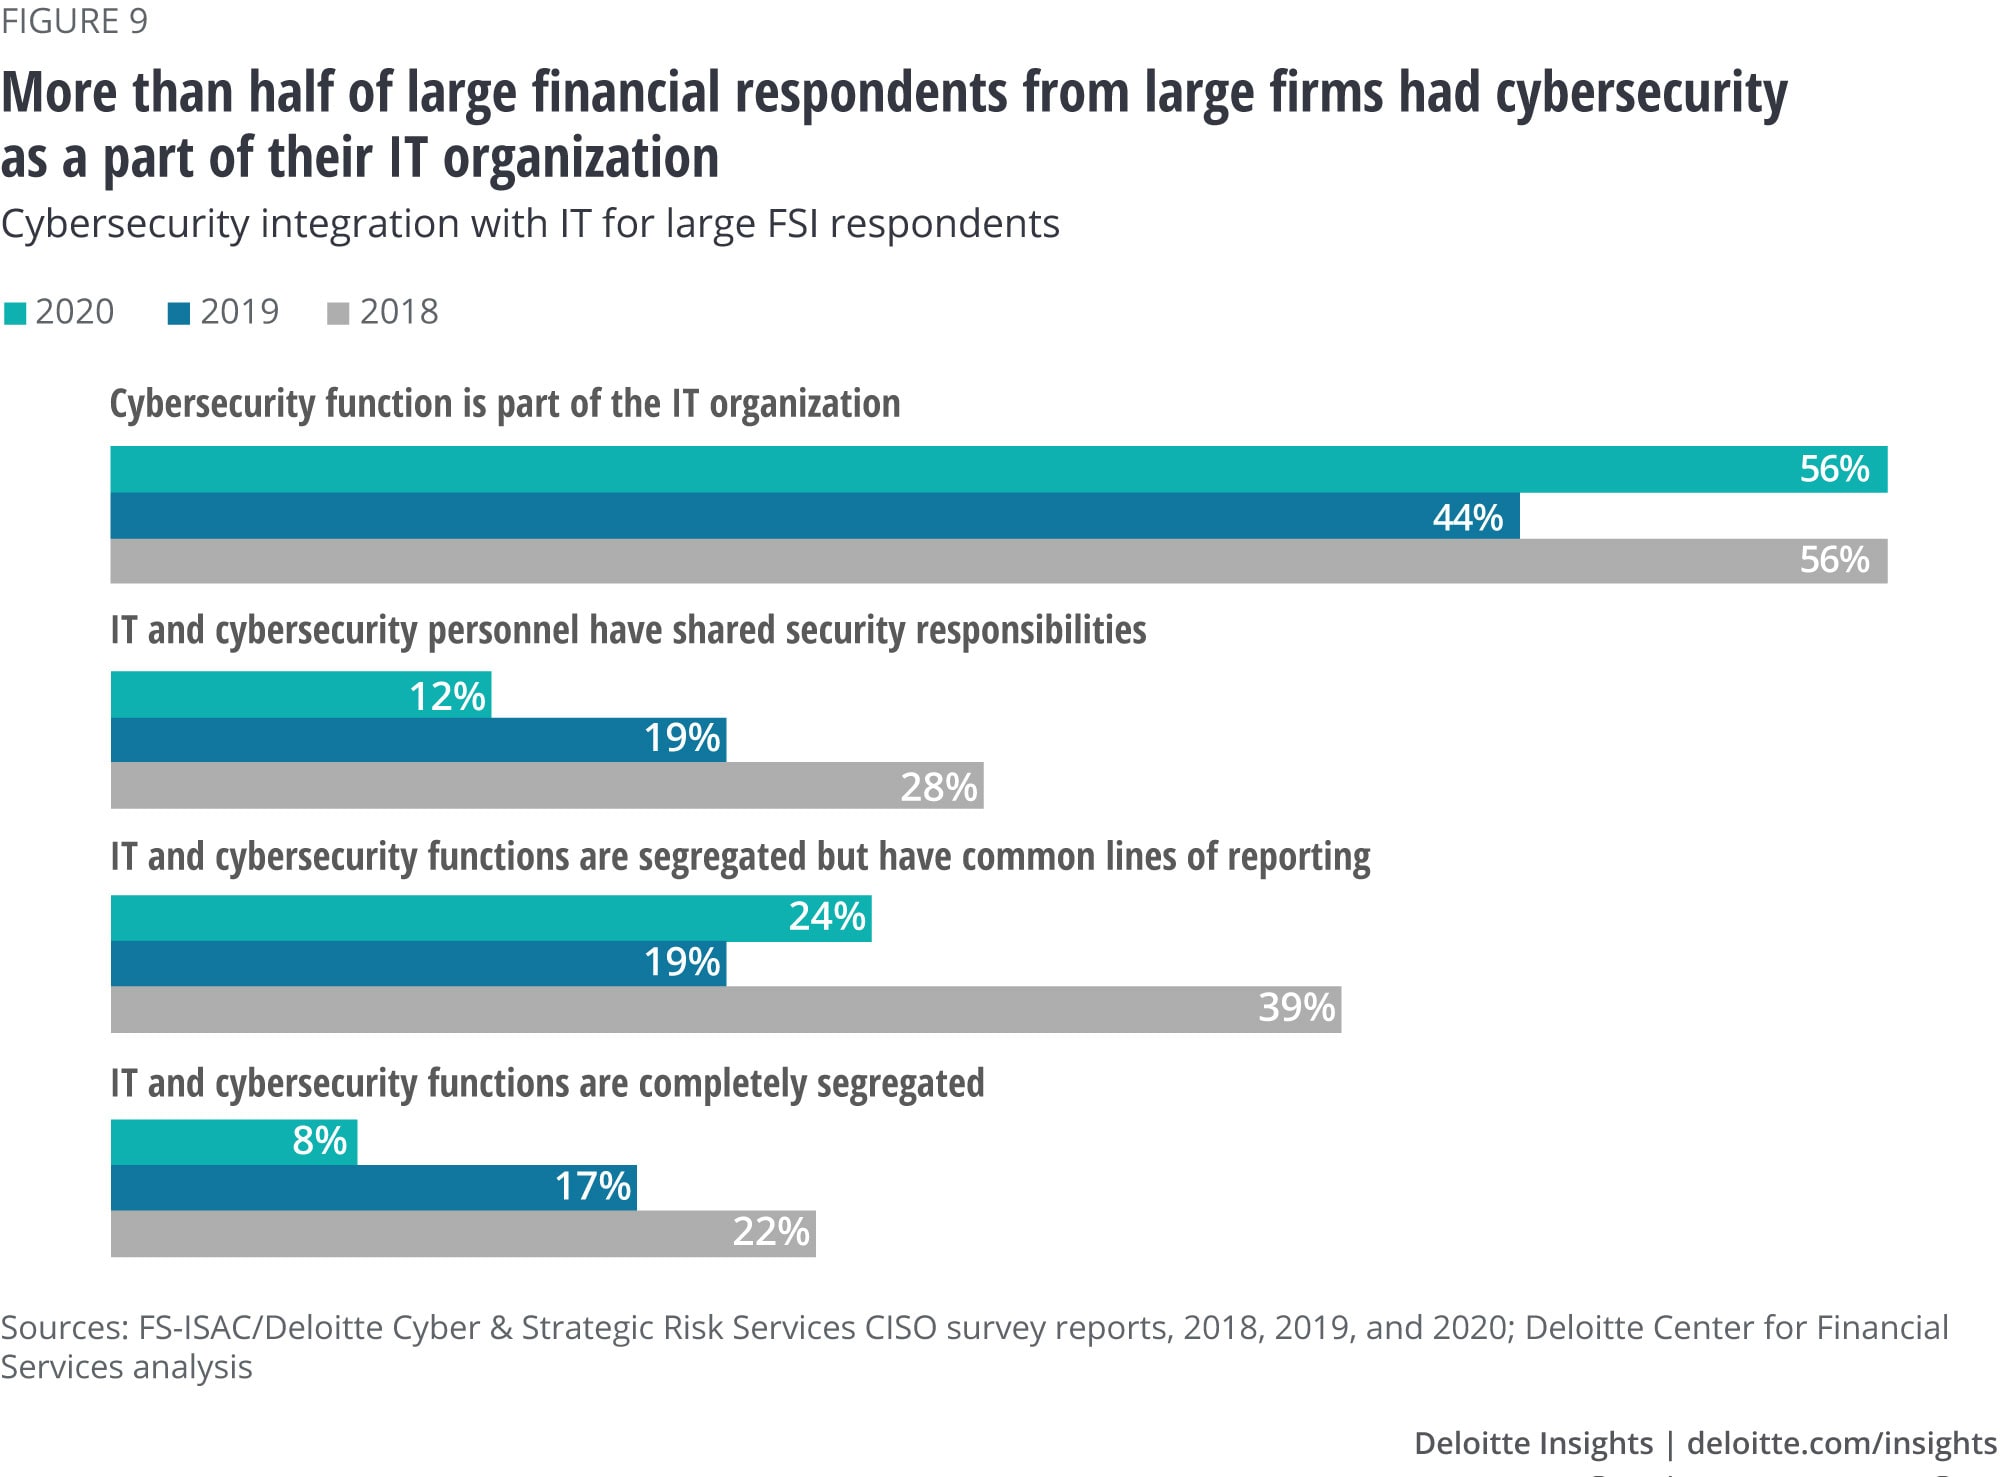 Majority of large financial respondents from large firms had cybersecurity as a part of their IT organization